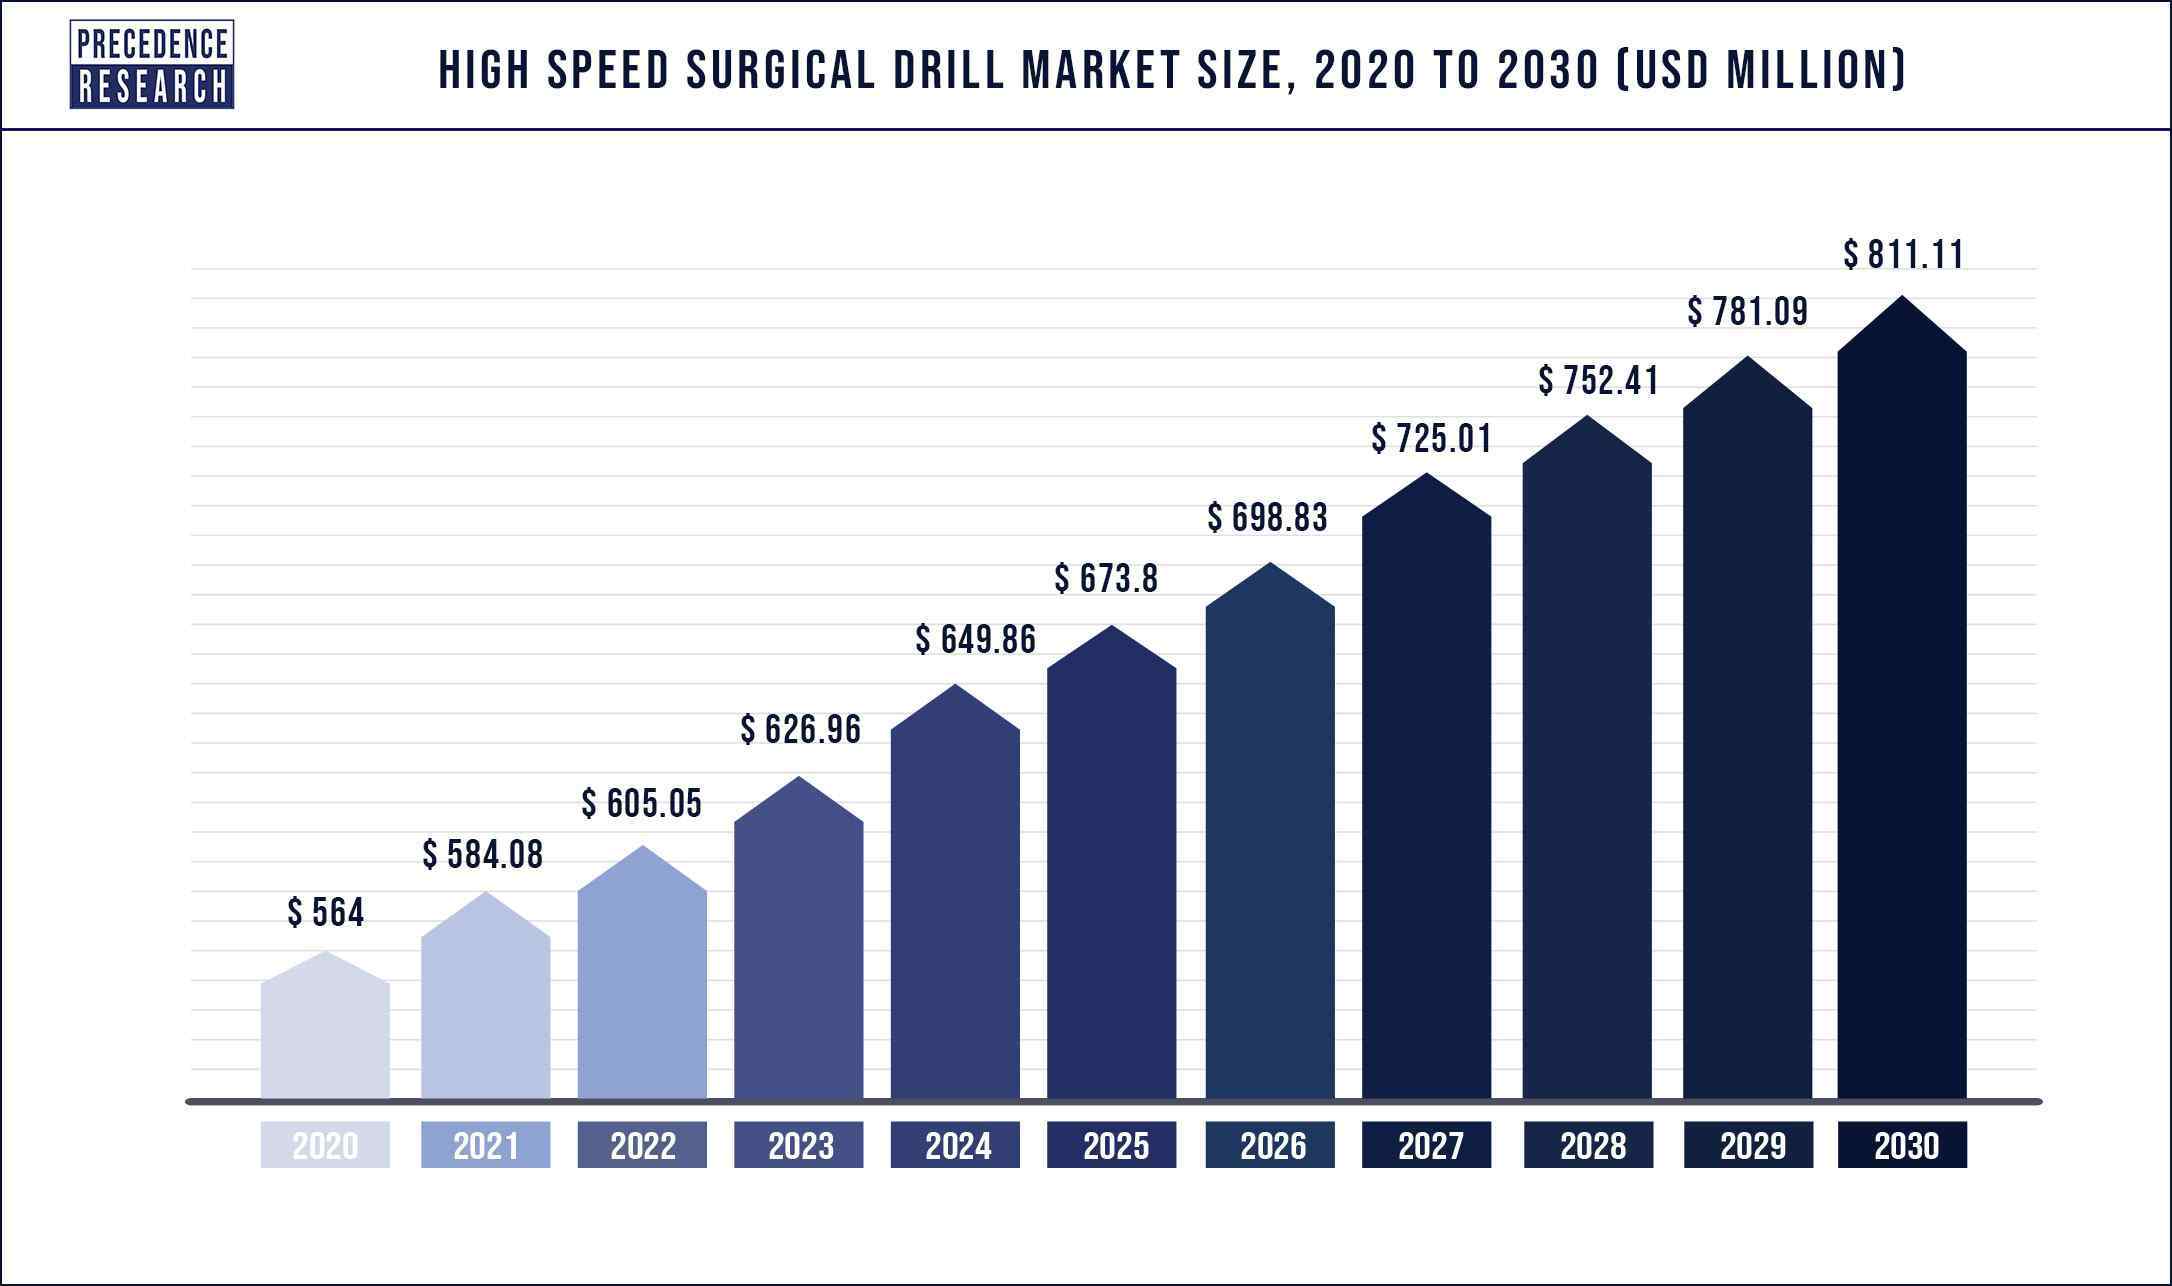 High Speed Surgical Drill Market Size 2020-2030